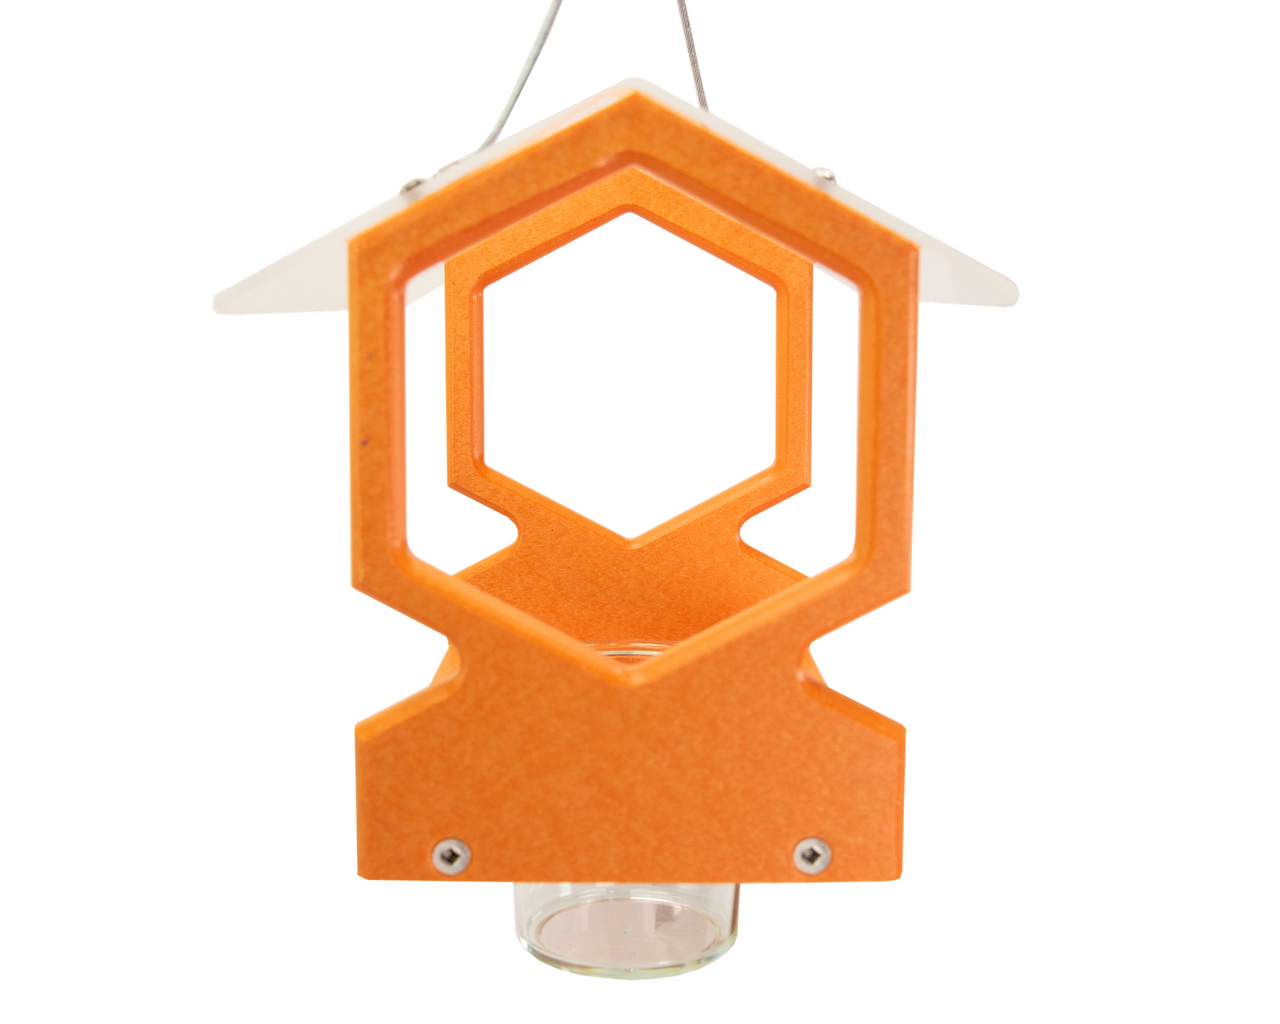 JCS Wildlife Geometric Hanging Oriole Feeder - Holds 1 Cup of Grape Jelly!